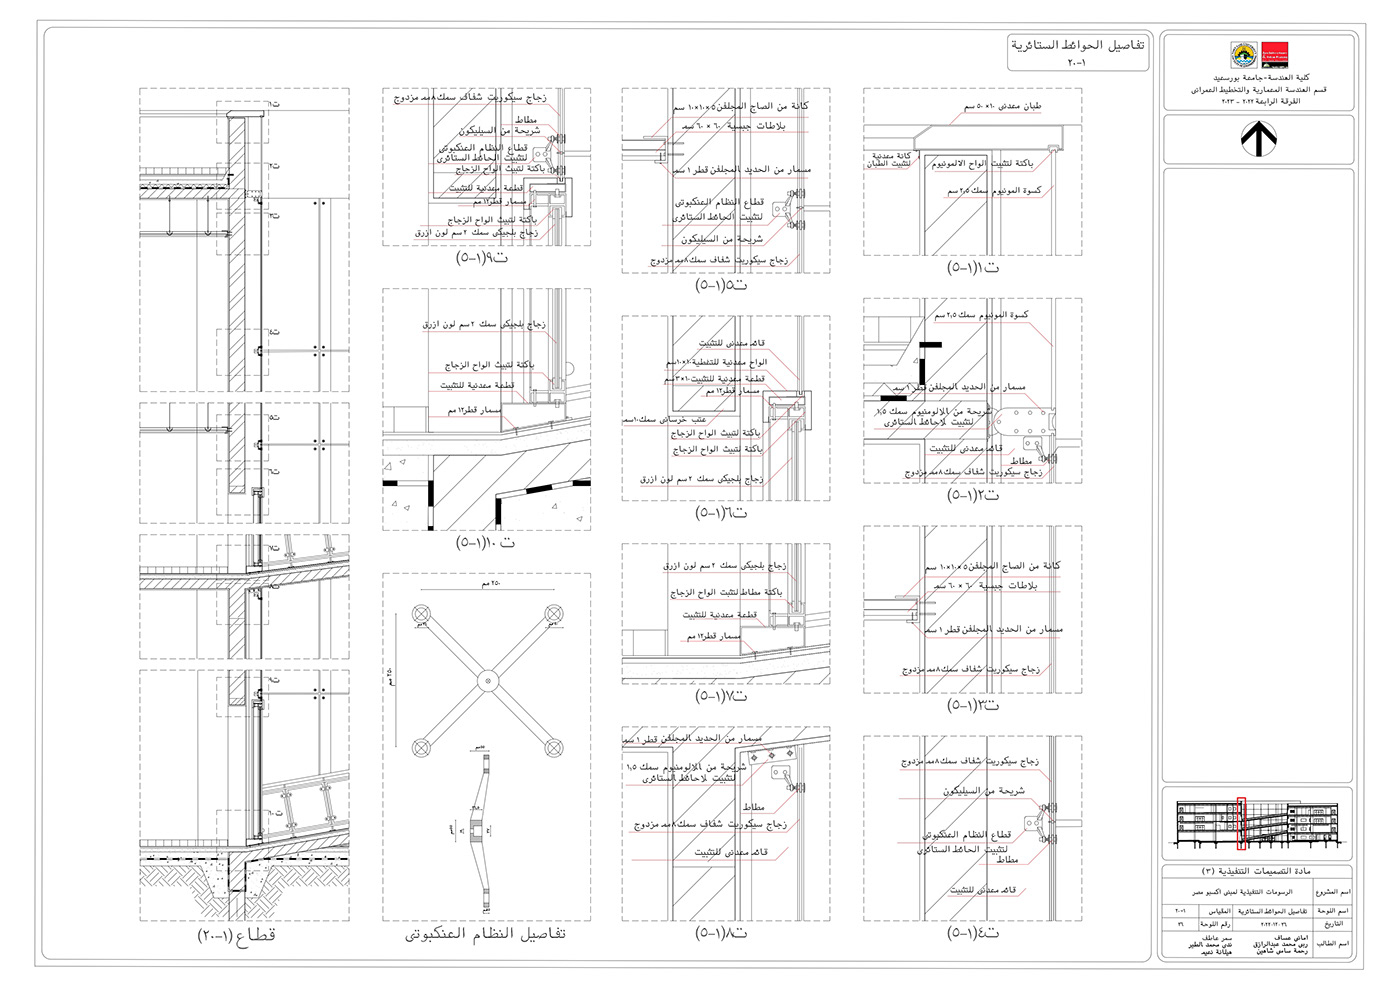 architecture details executive HVAC shopdrawing working drawings